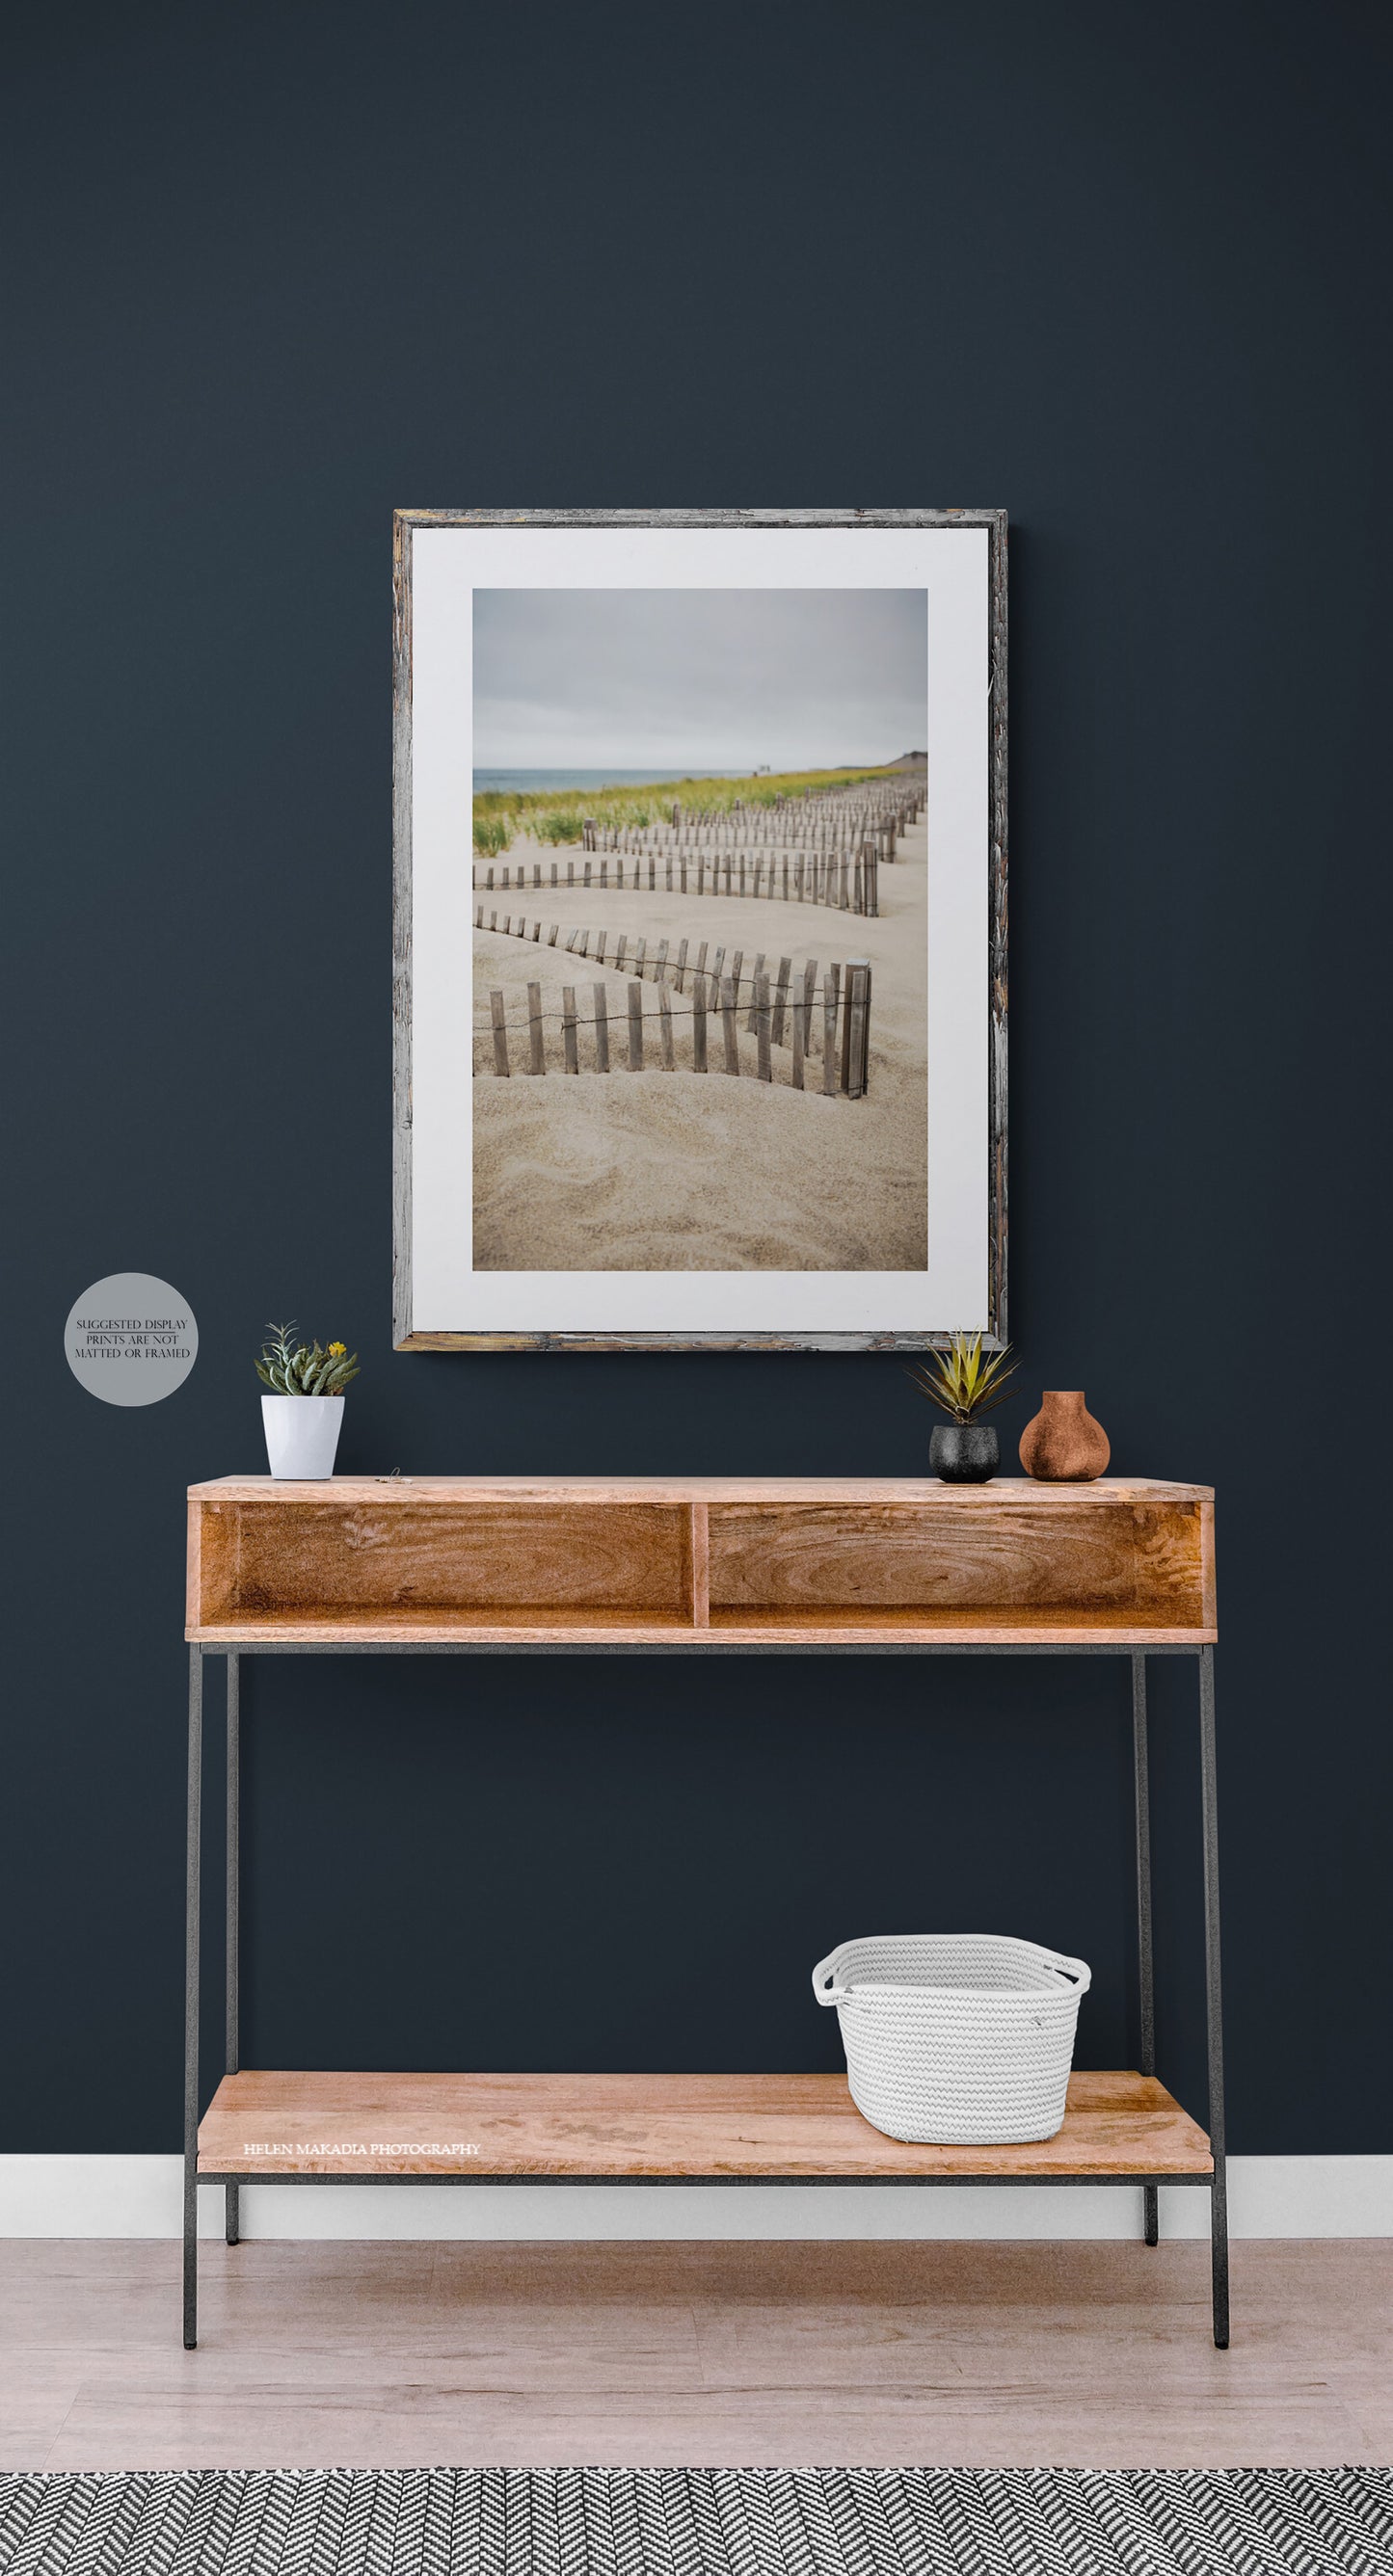 Moody Fences at Nauset Beach on a Dark Blue Entryway Wall above a Console Table